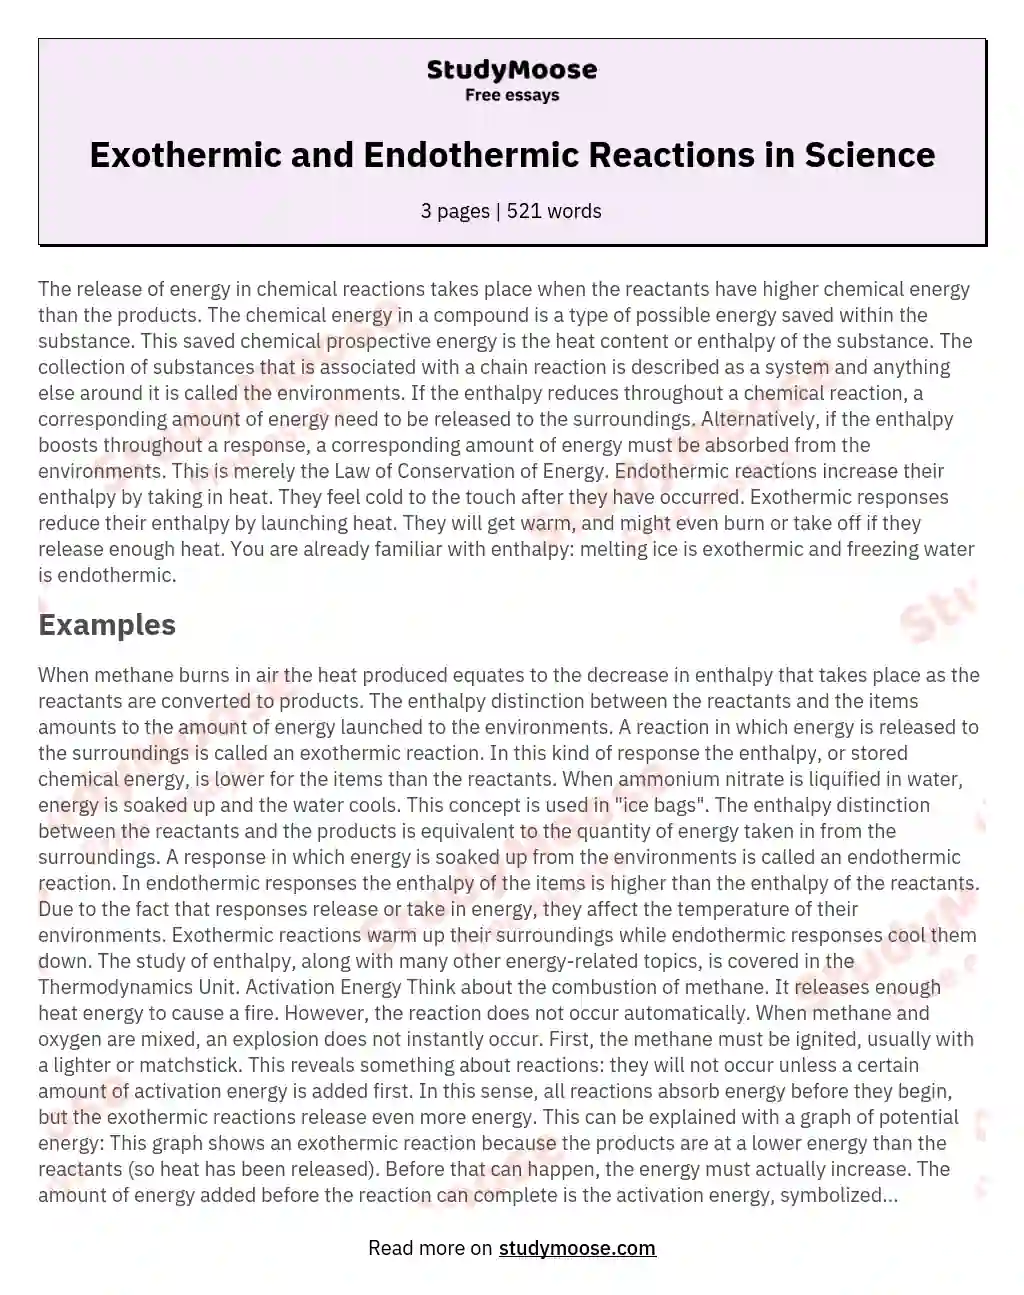 Exothermic and Endothermic Reactions in Science essay